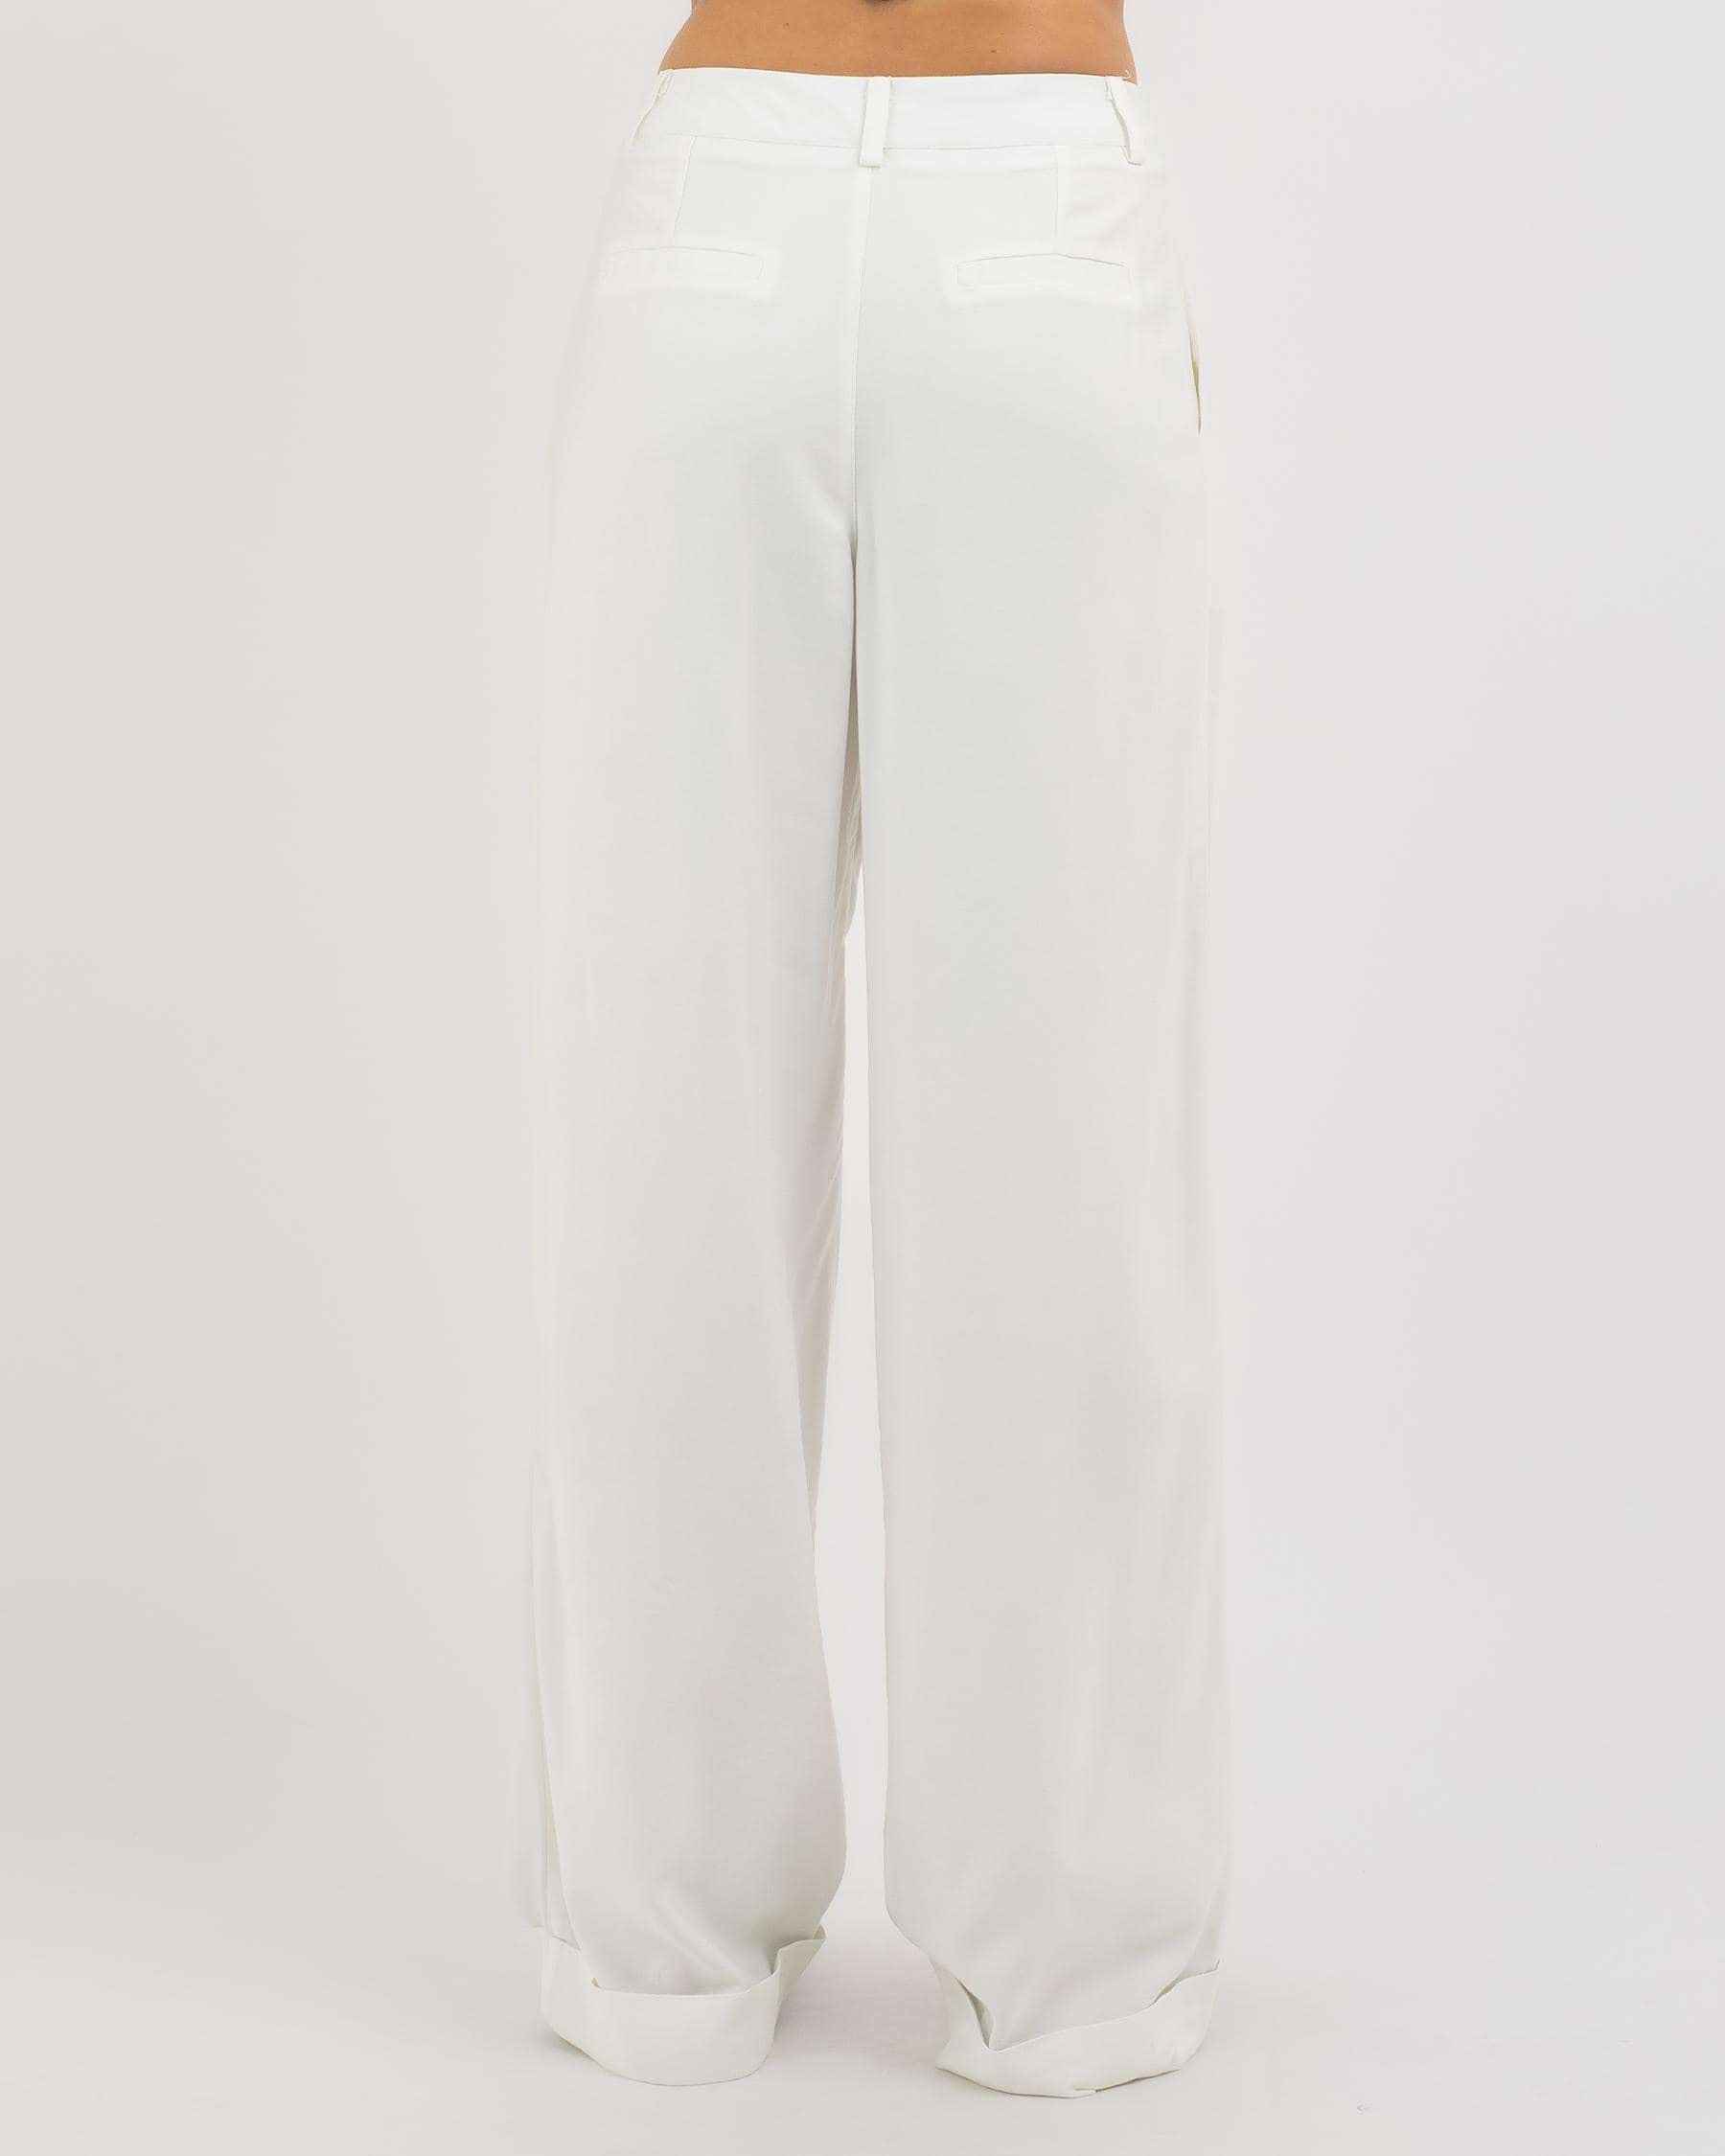 Shop Ava And Ever Viktoria Pants In Cream - Fast Shipping & Easy ...